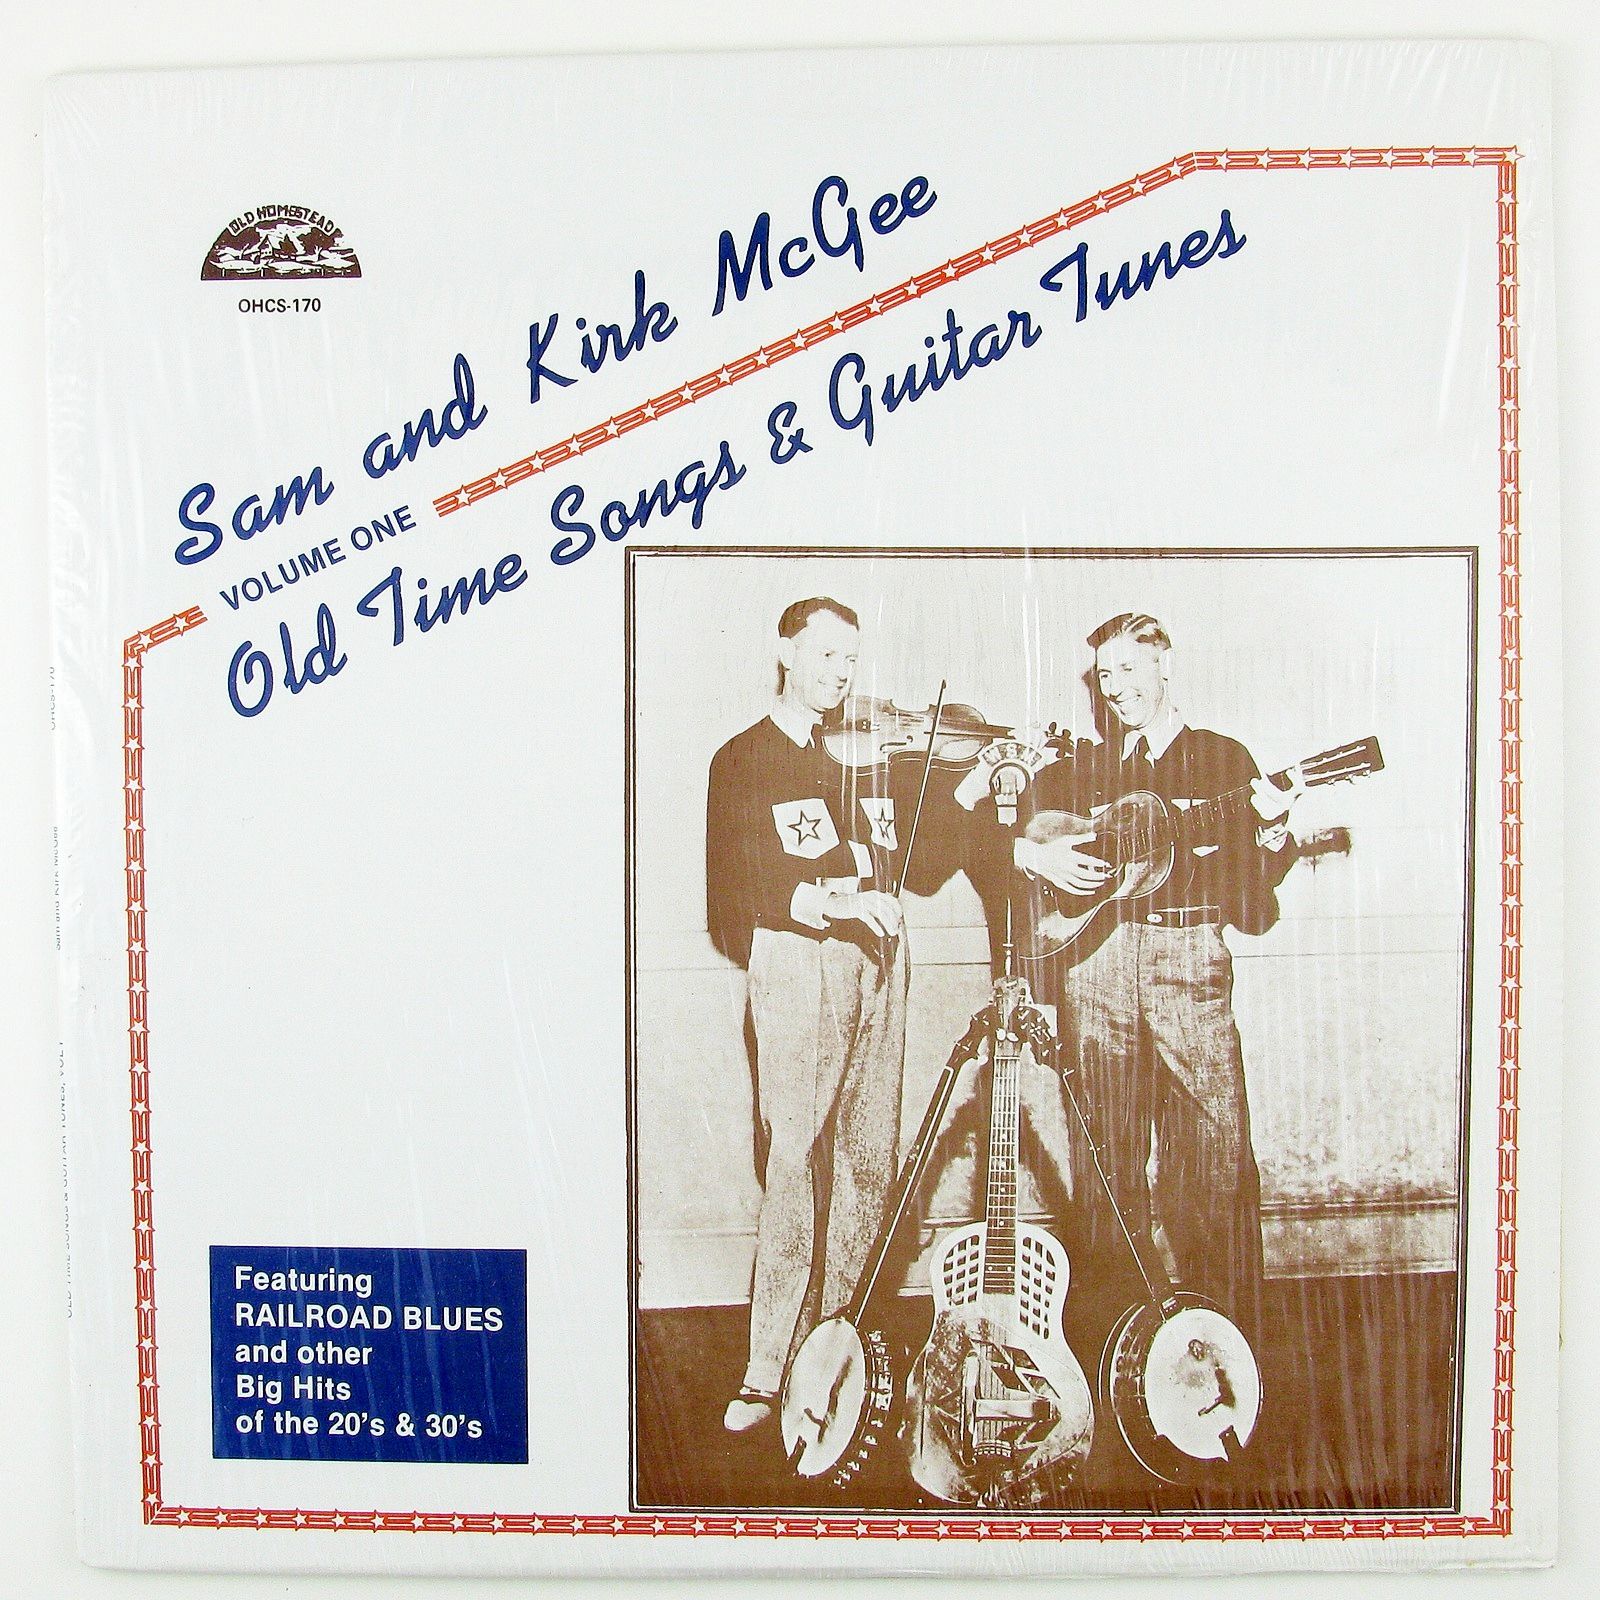 SAM AND KIRK McGEE Volume One   Old Time songs & Guitar Tunes LP NM